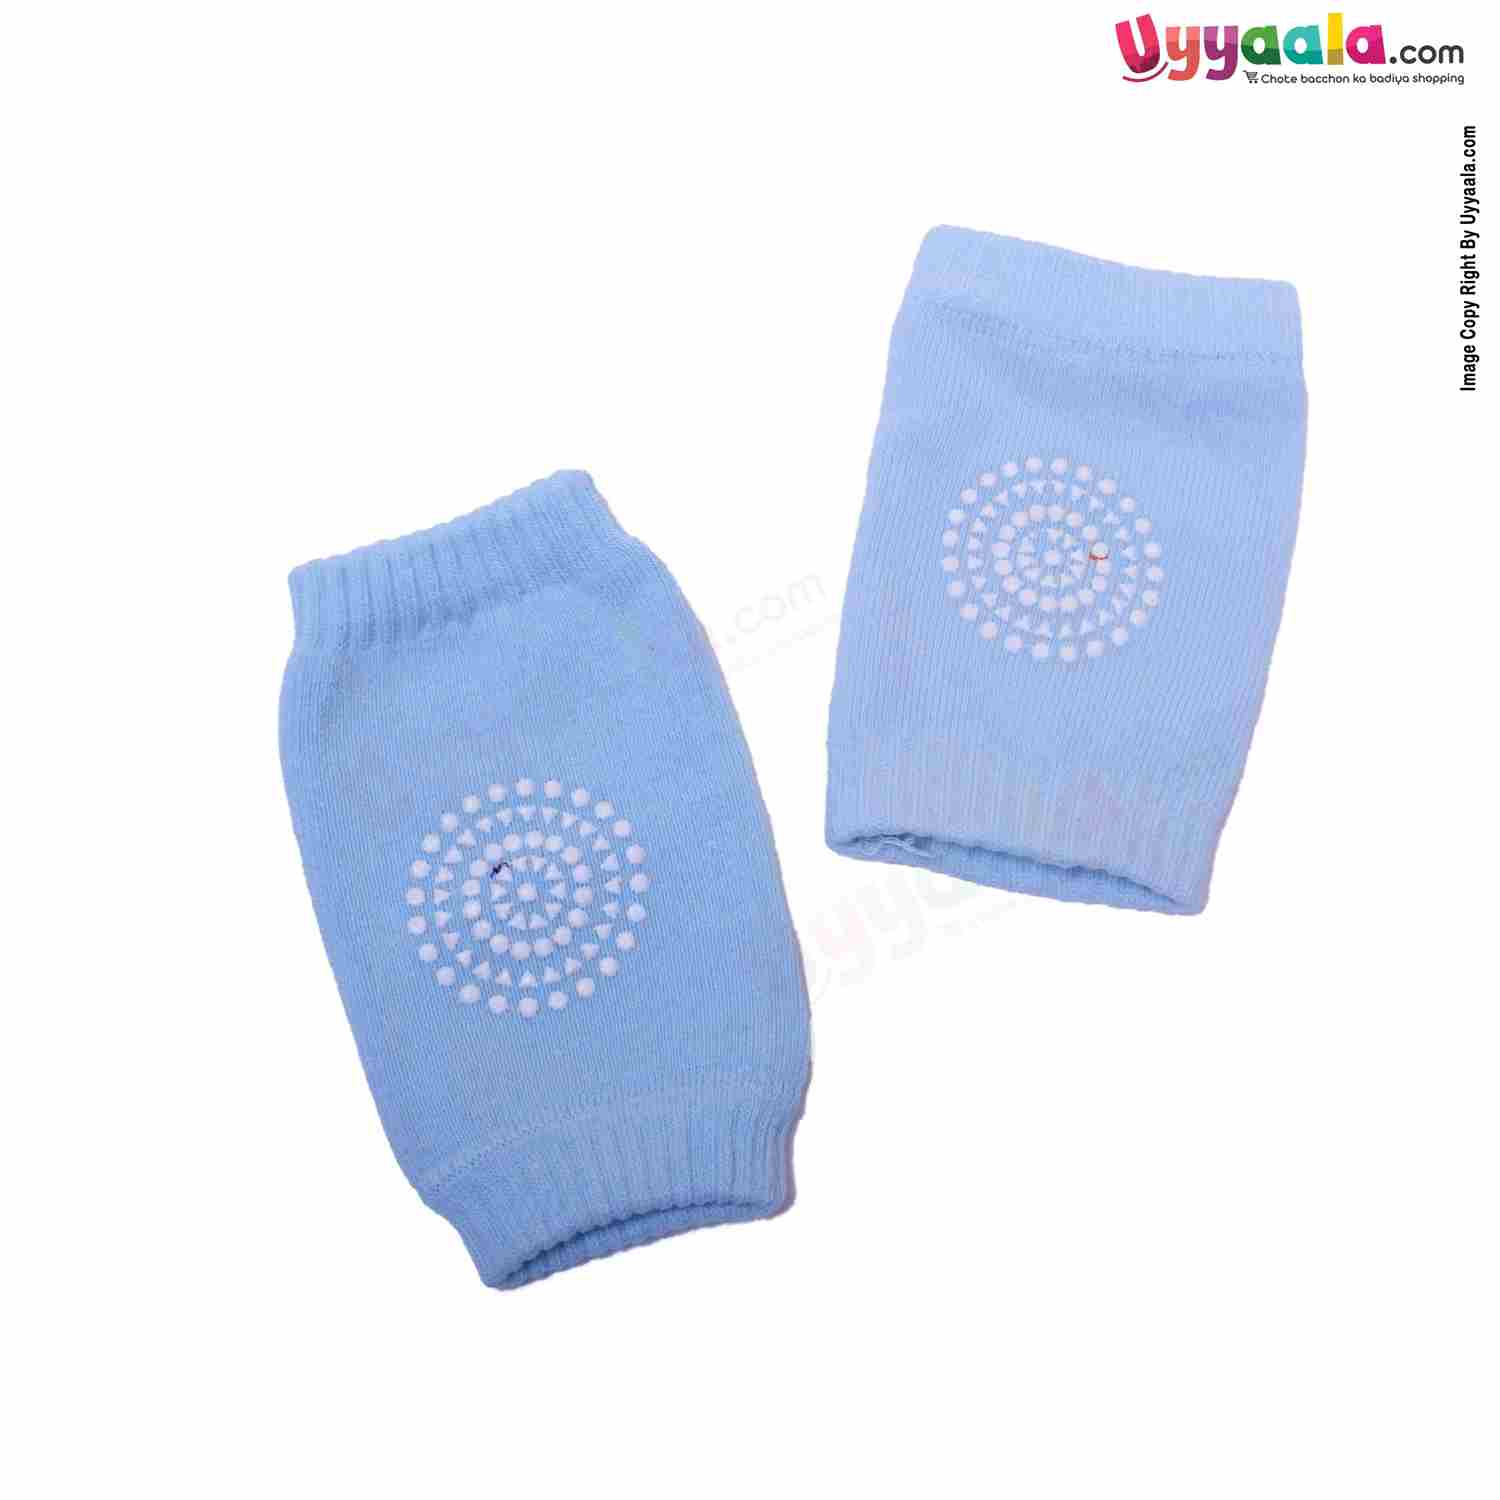 FOR BABY Knee Pads With Grip Age 3 - 12 m